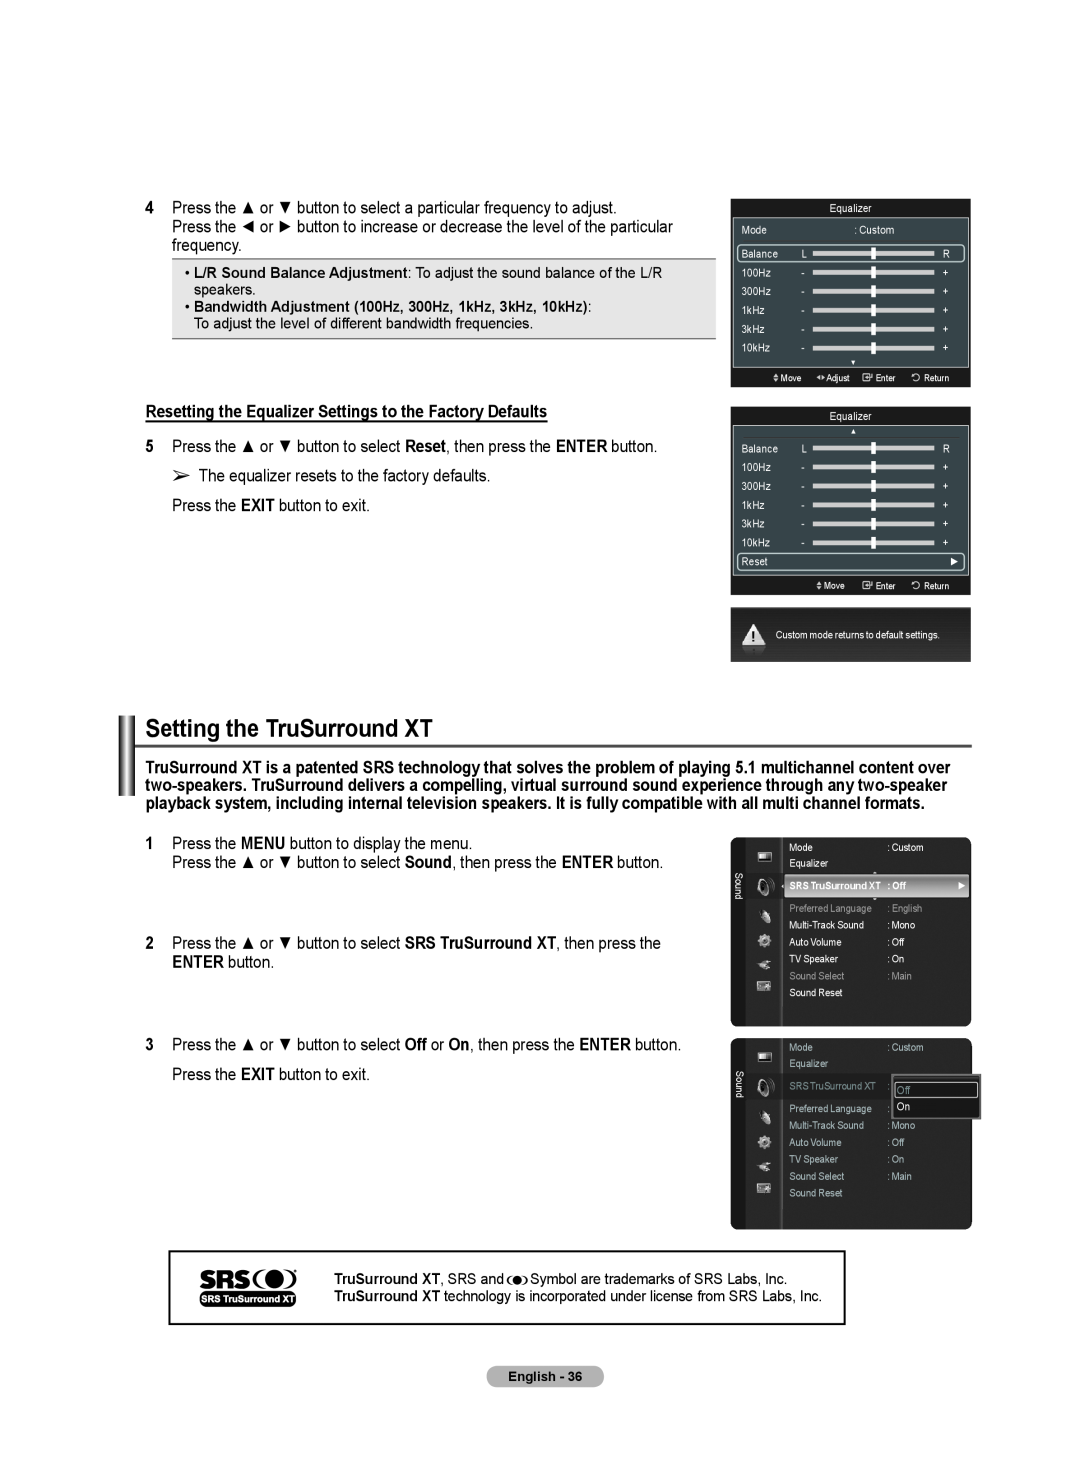 Samsung 510 user manual Setting the TruSurround XT, Resetting the Equalizer Settings to the Factory Defaults 